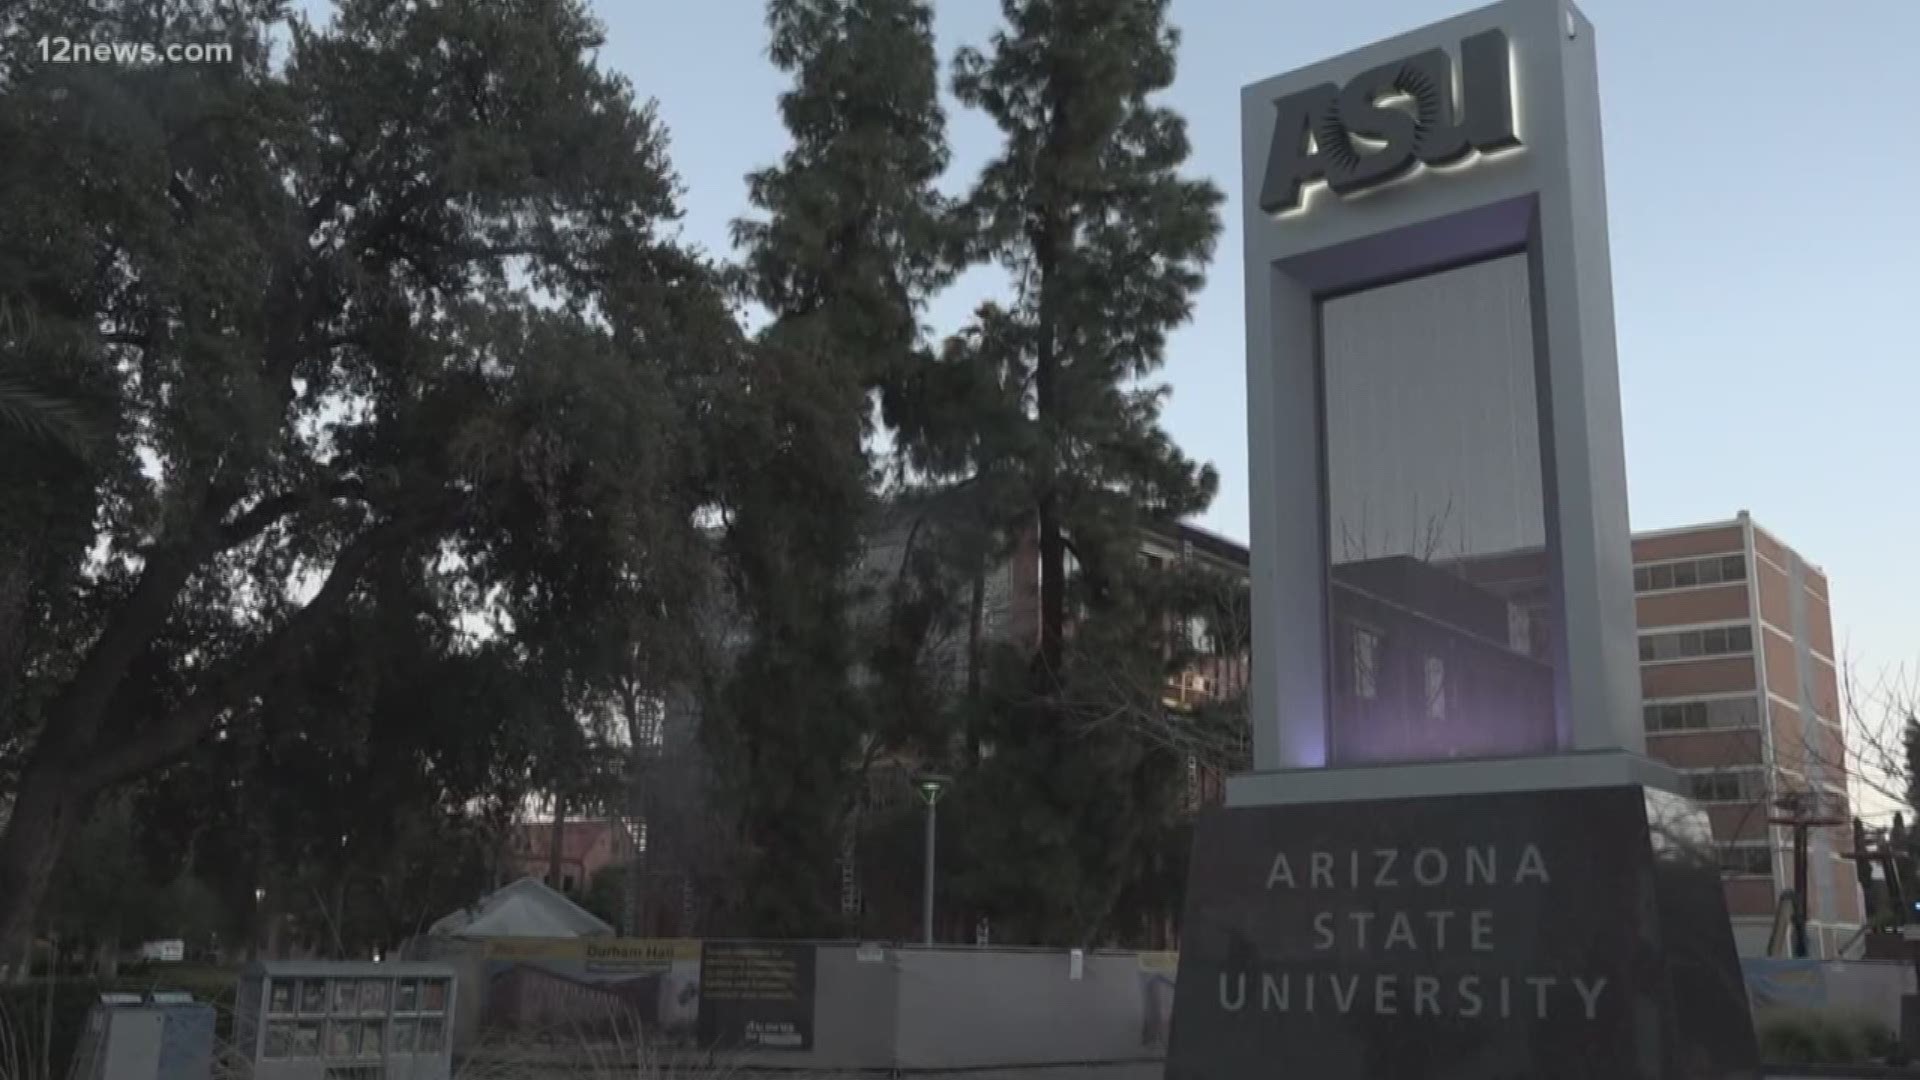 A member of the Arizona State University community has been diagnosed with the coronavirus. Team 12's Erica Stapleton has the latest.